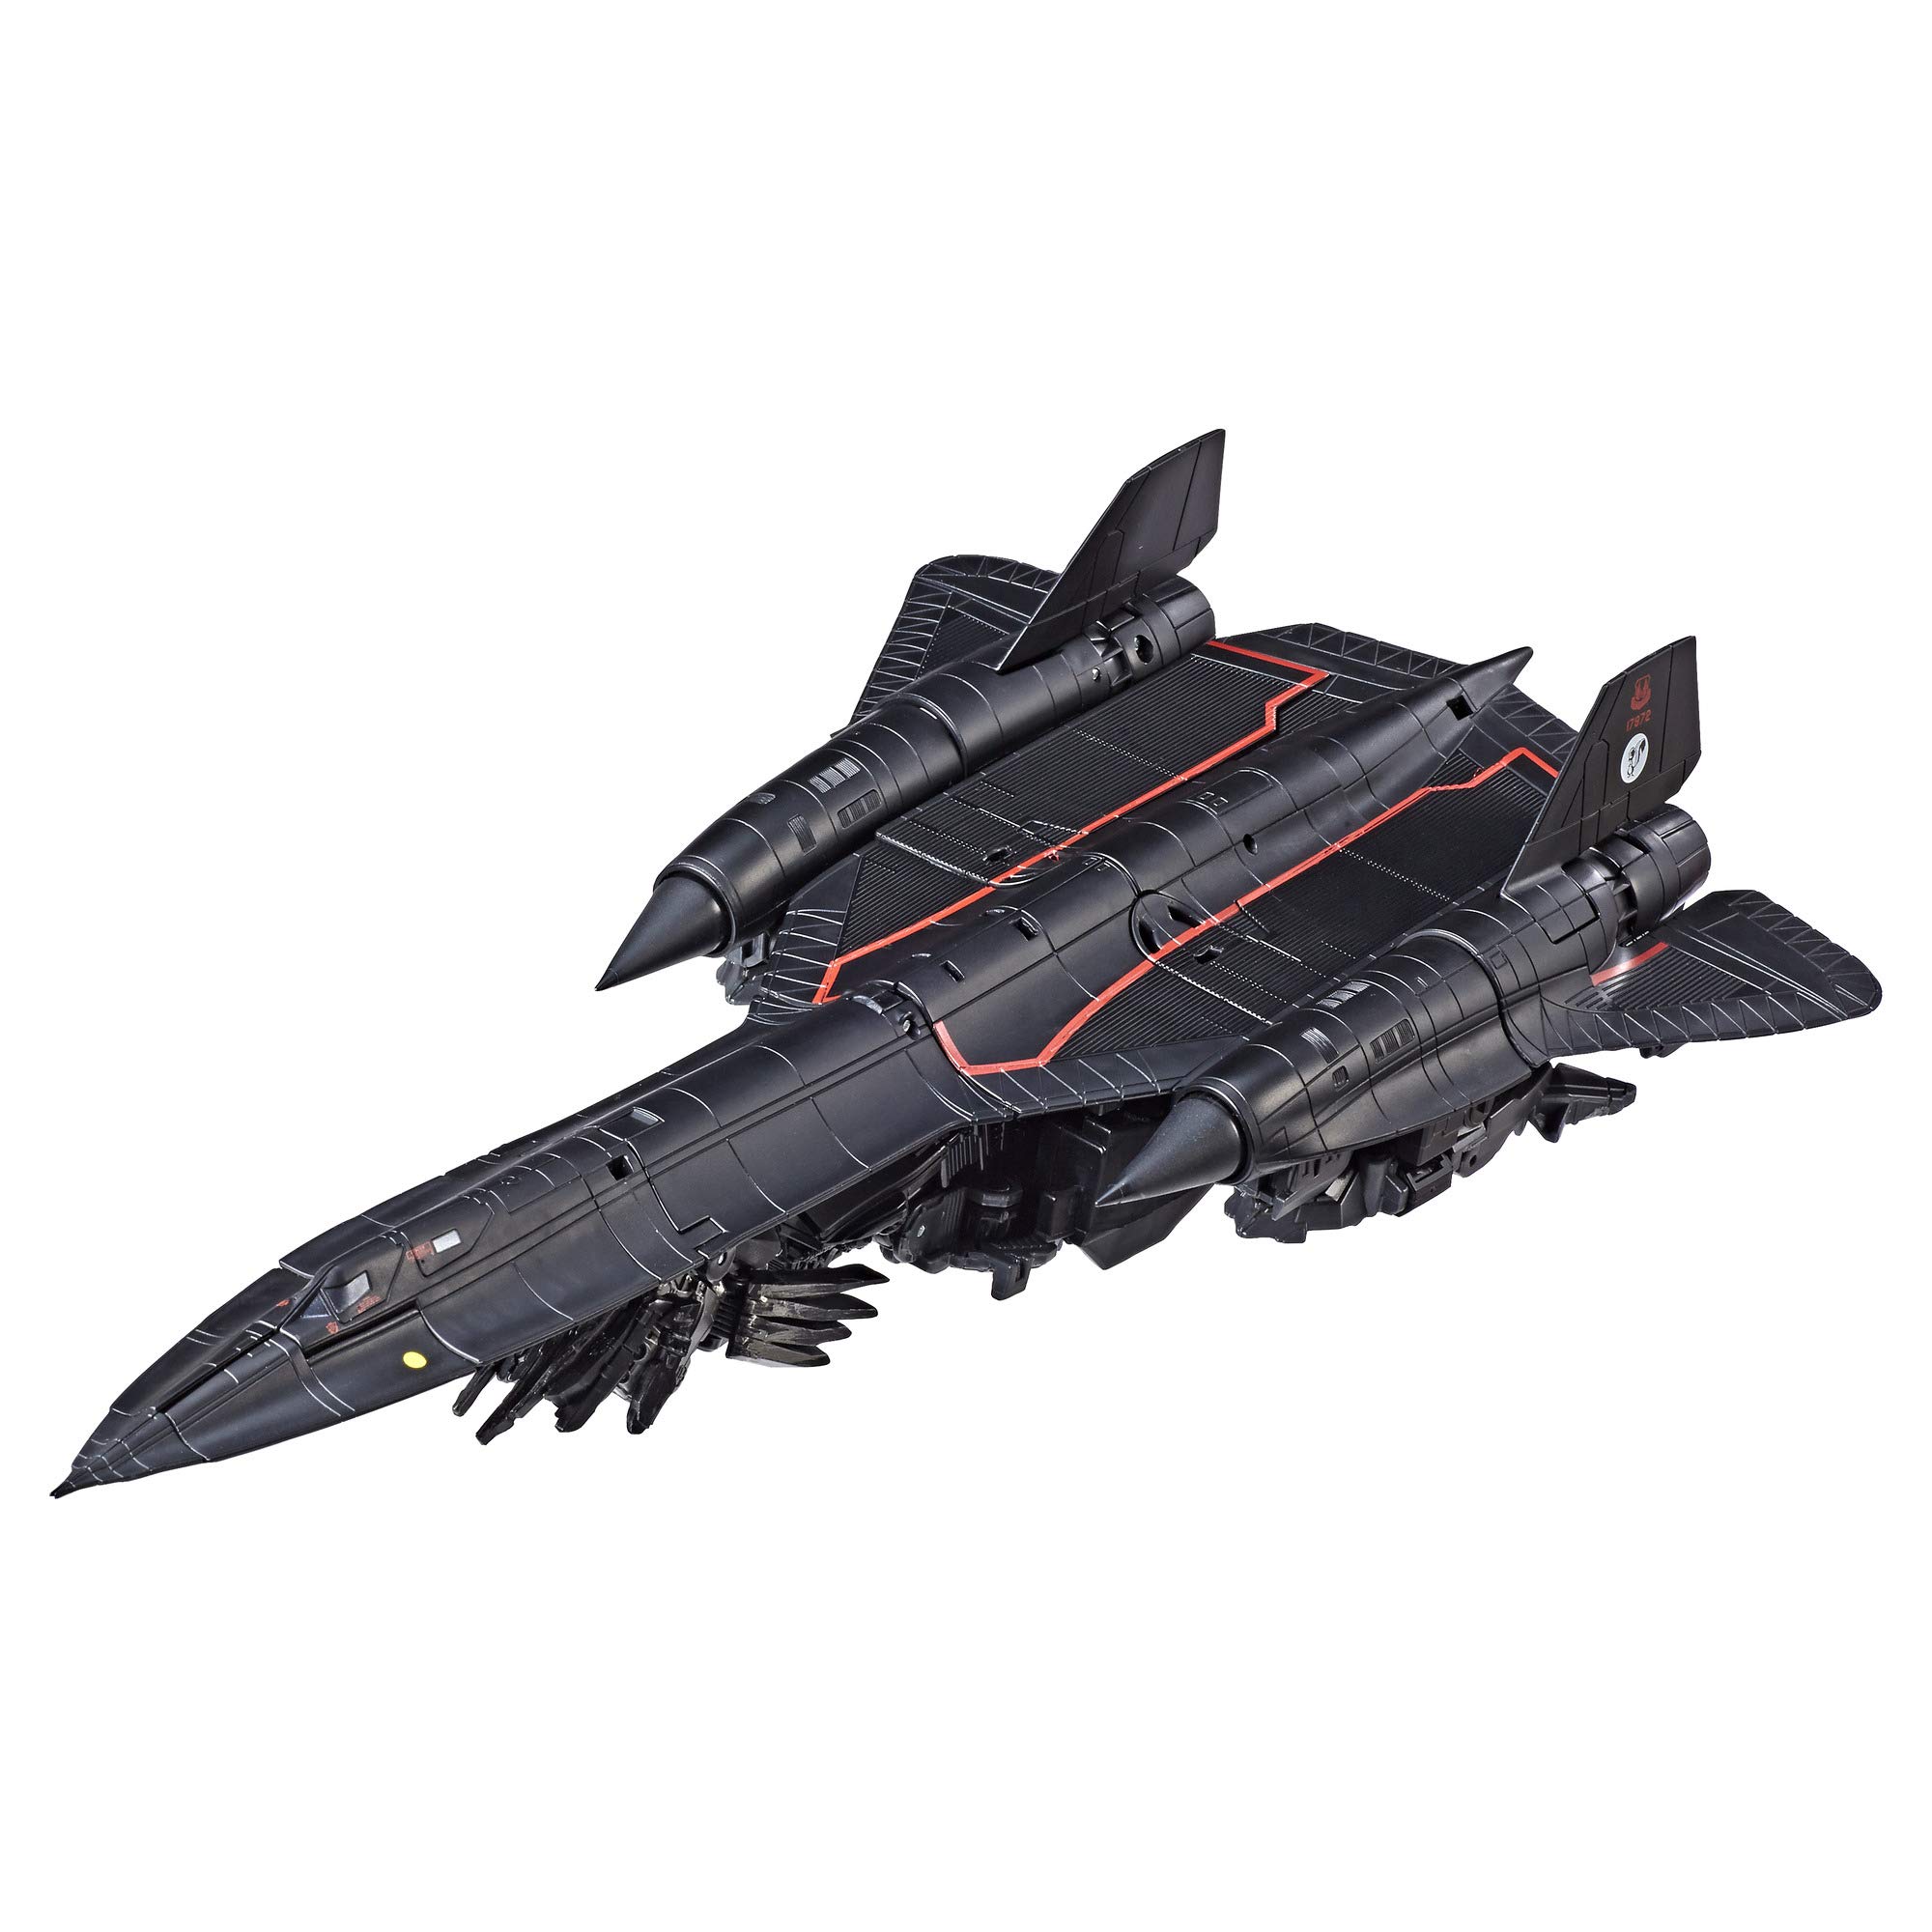 Transformers Toys Studio Series 35 Leader Class Revenge of The Fallen Movie Jetfire Action Figure - Kids Ages 8 and Up, 8.5-inch